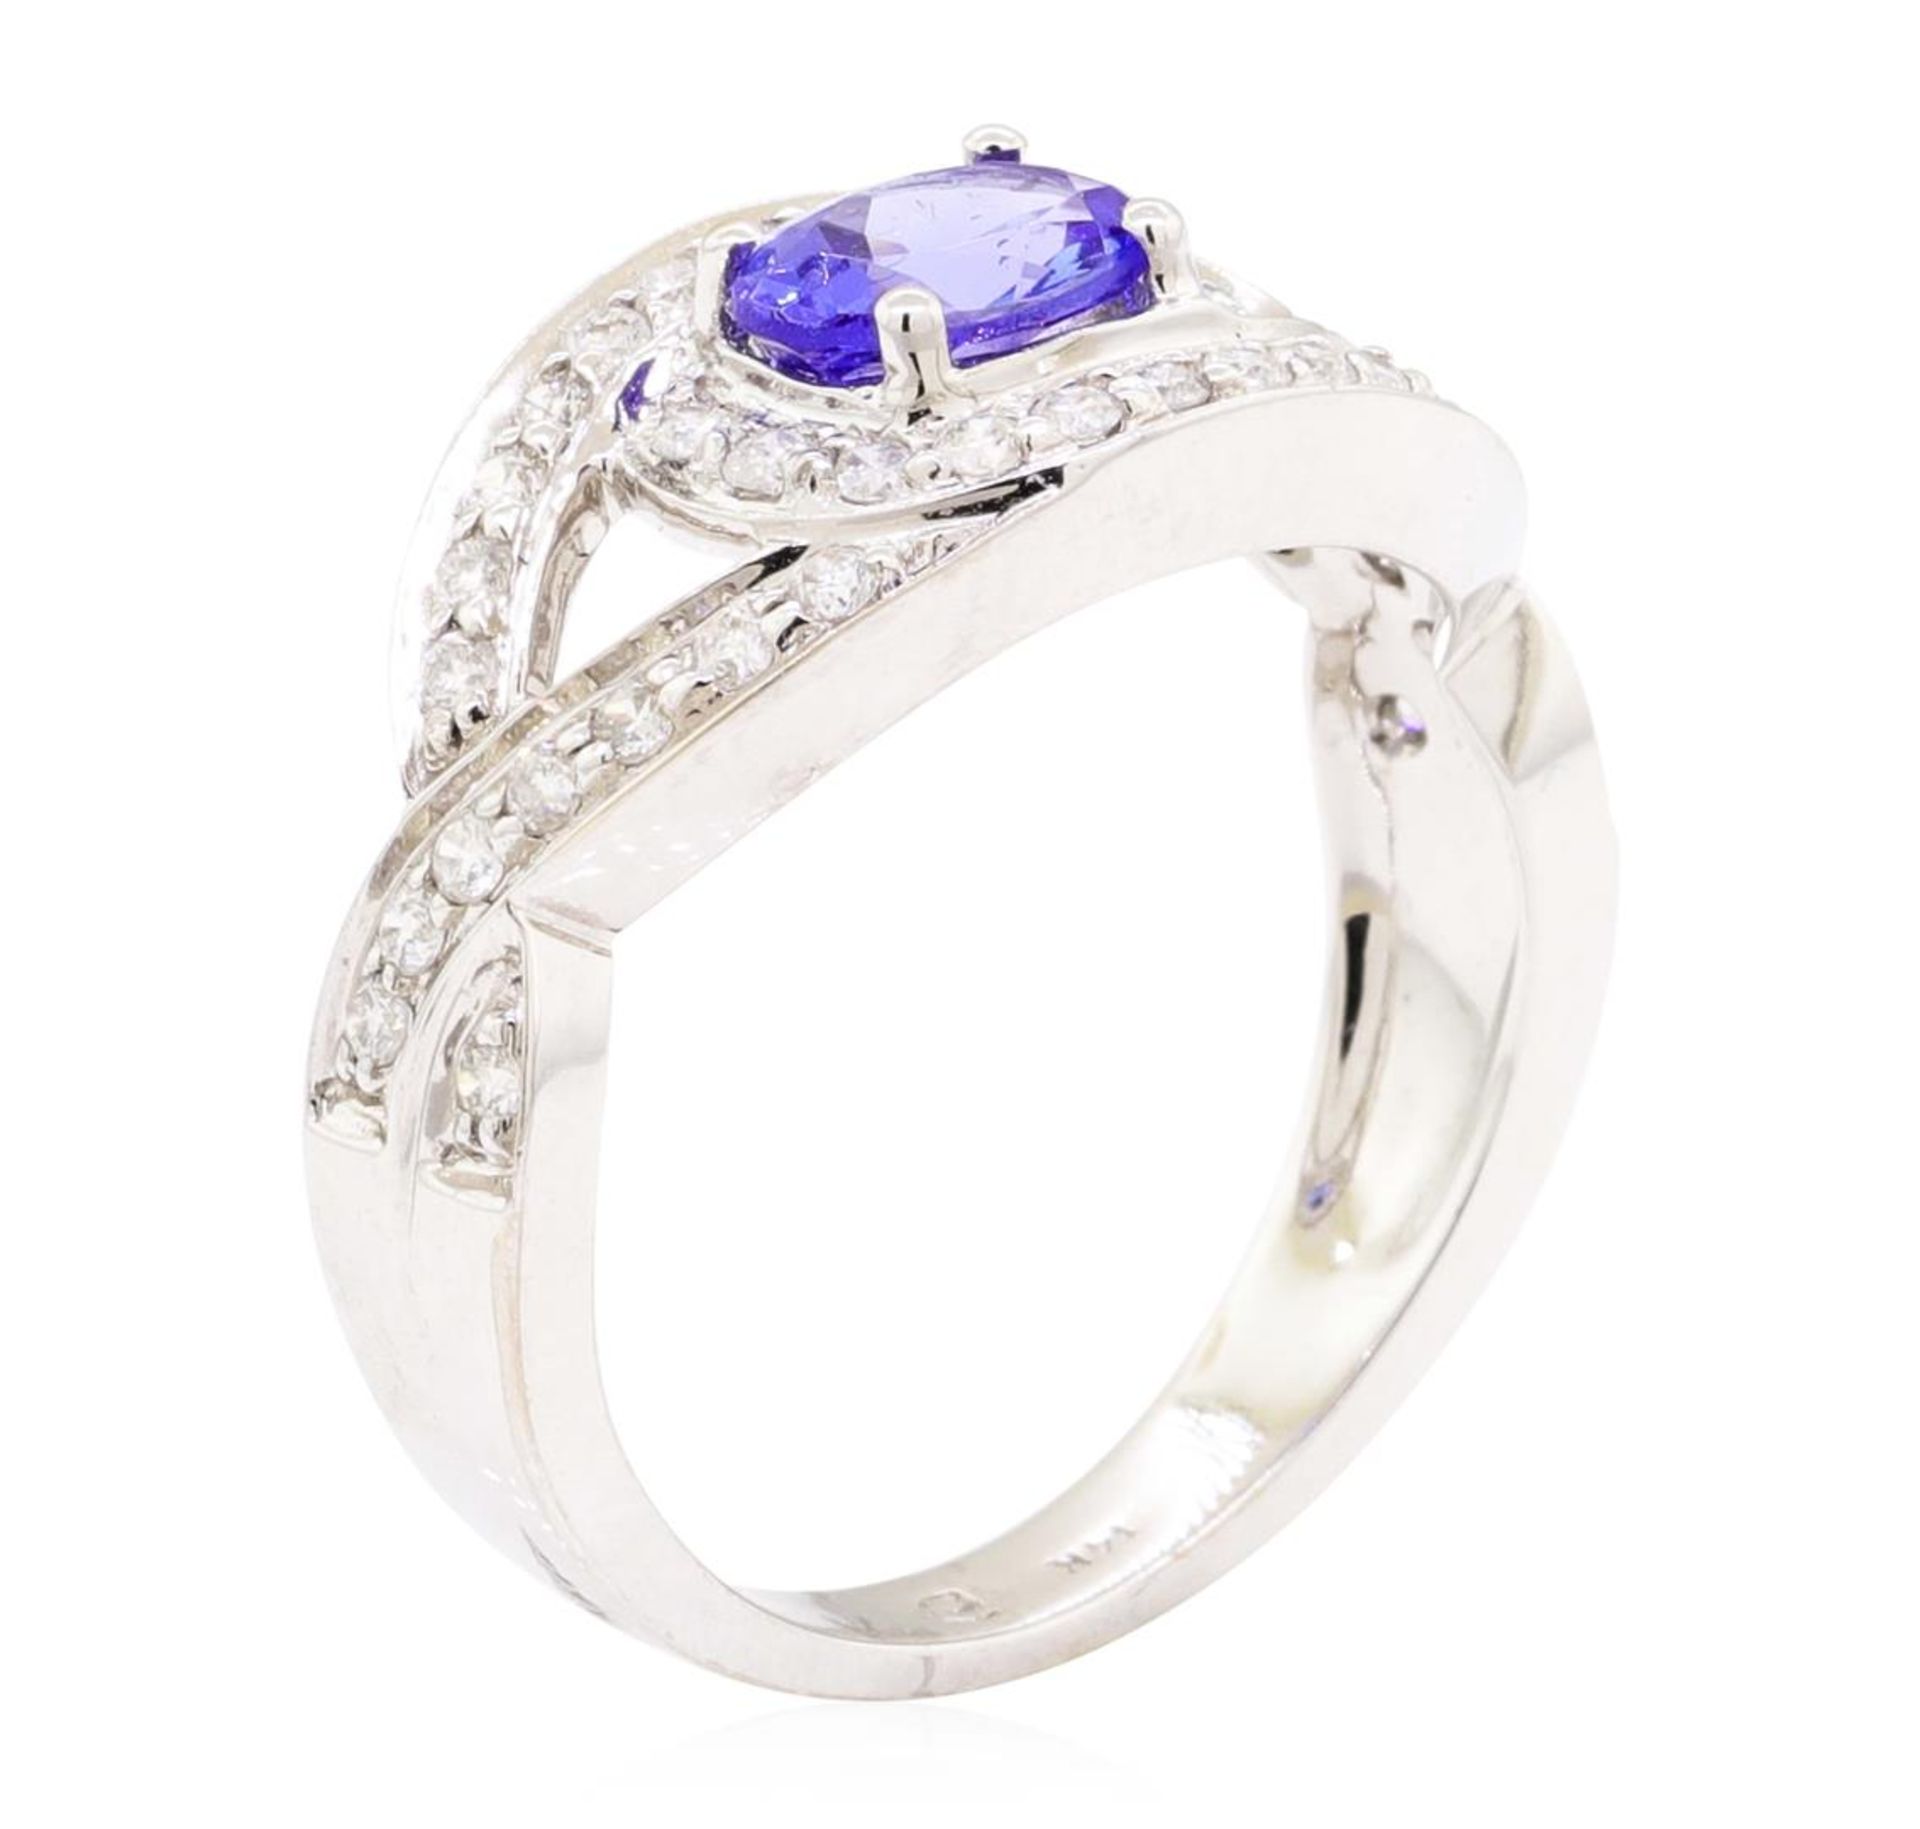 1.22 ctw Oval Mixed Tanzanite And Round Brilliant Cut Diamond Ring - 14KT White - Image 4 of 5